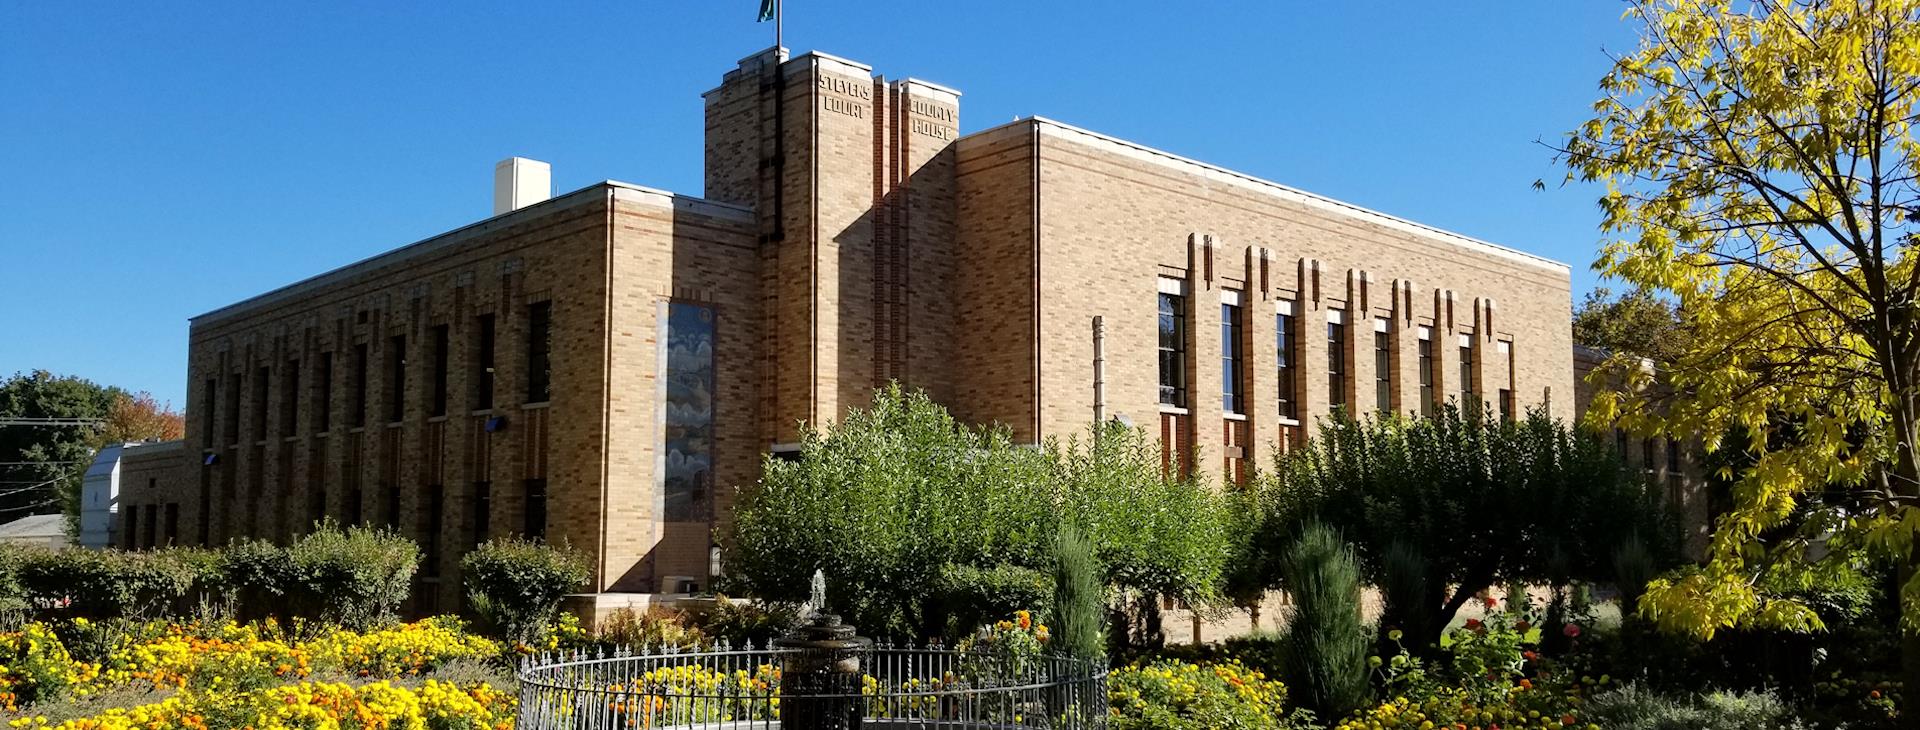 Image of Stevens County Superior Court